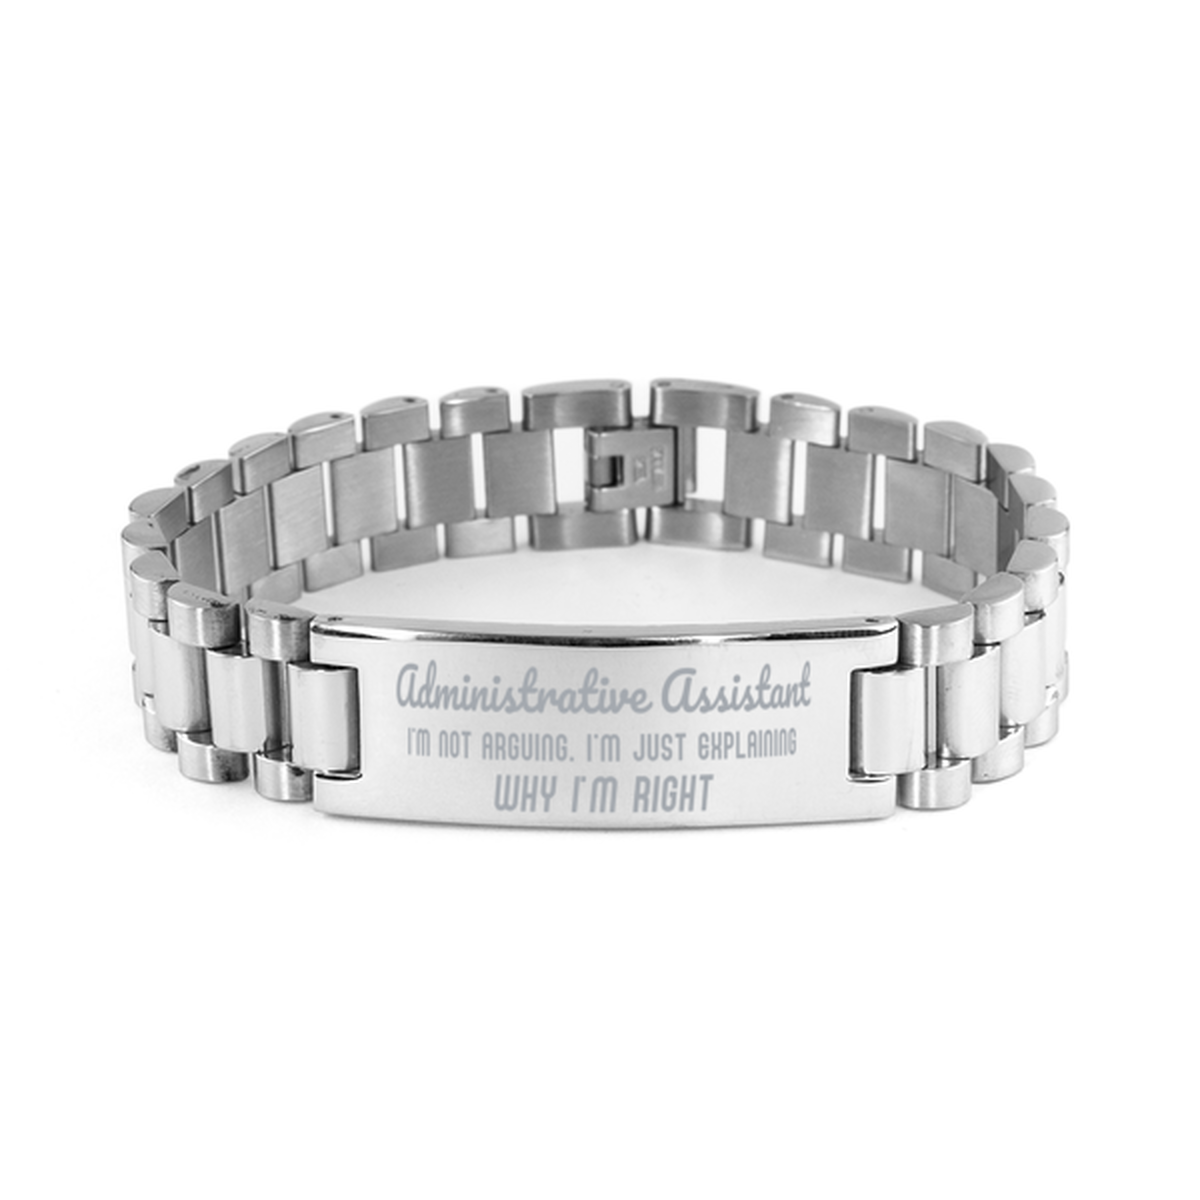 Administrative Assistant I'm not Arguing. I'm Just Explaining Why I'm RIGHT Ladder Stainless Steel Bracelet, Graduation Birthday Christmas Administrative Assistant Gifts For Administrative Assistant Funny Saying Quote Present for Men Women Coworker